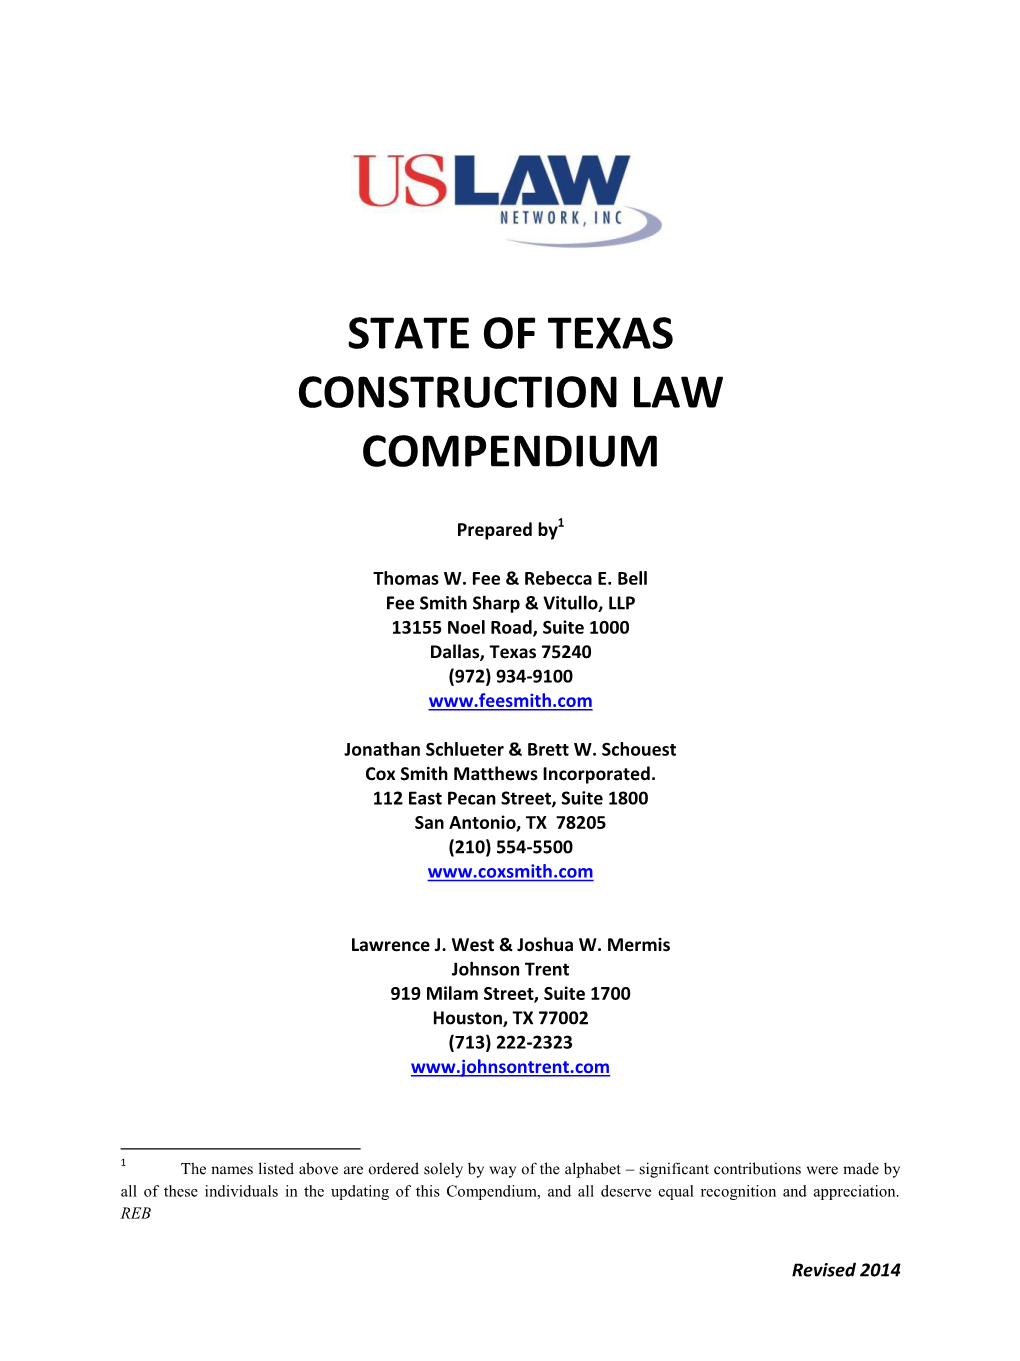 State of Texas Construction Law Compendium